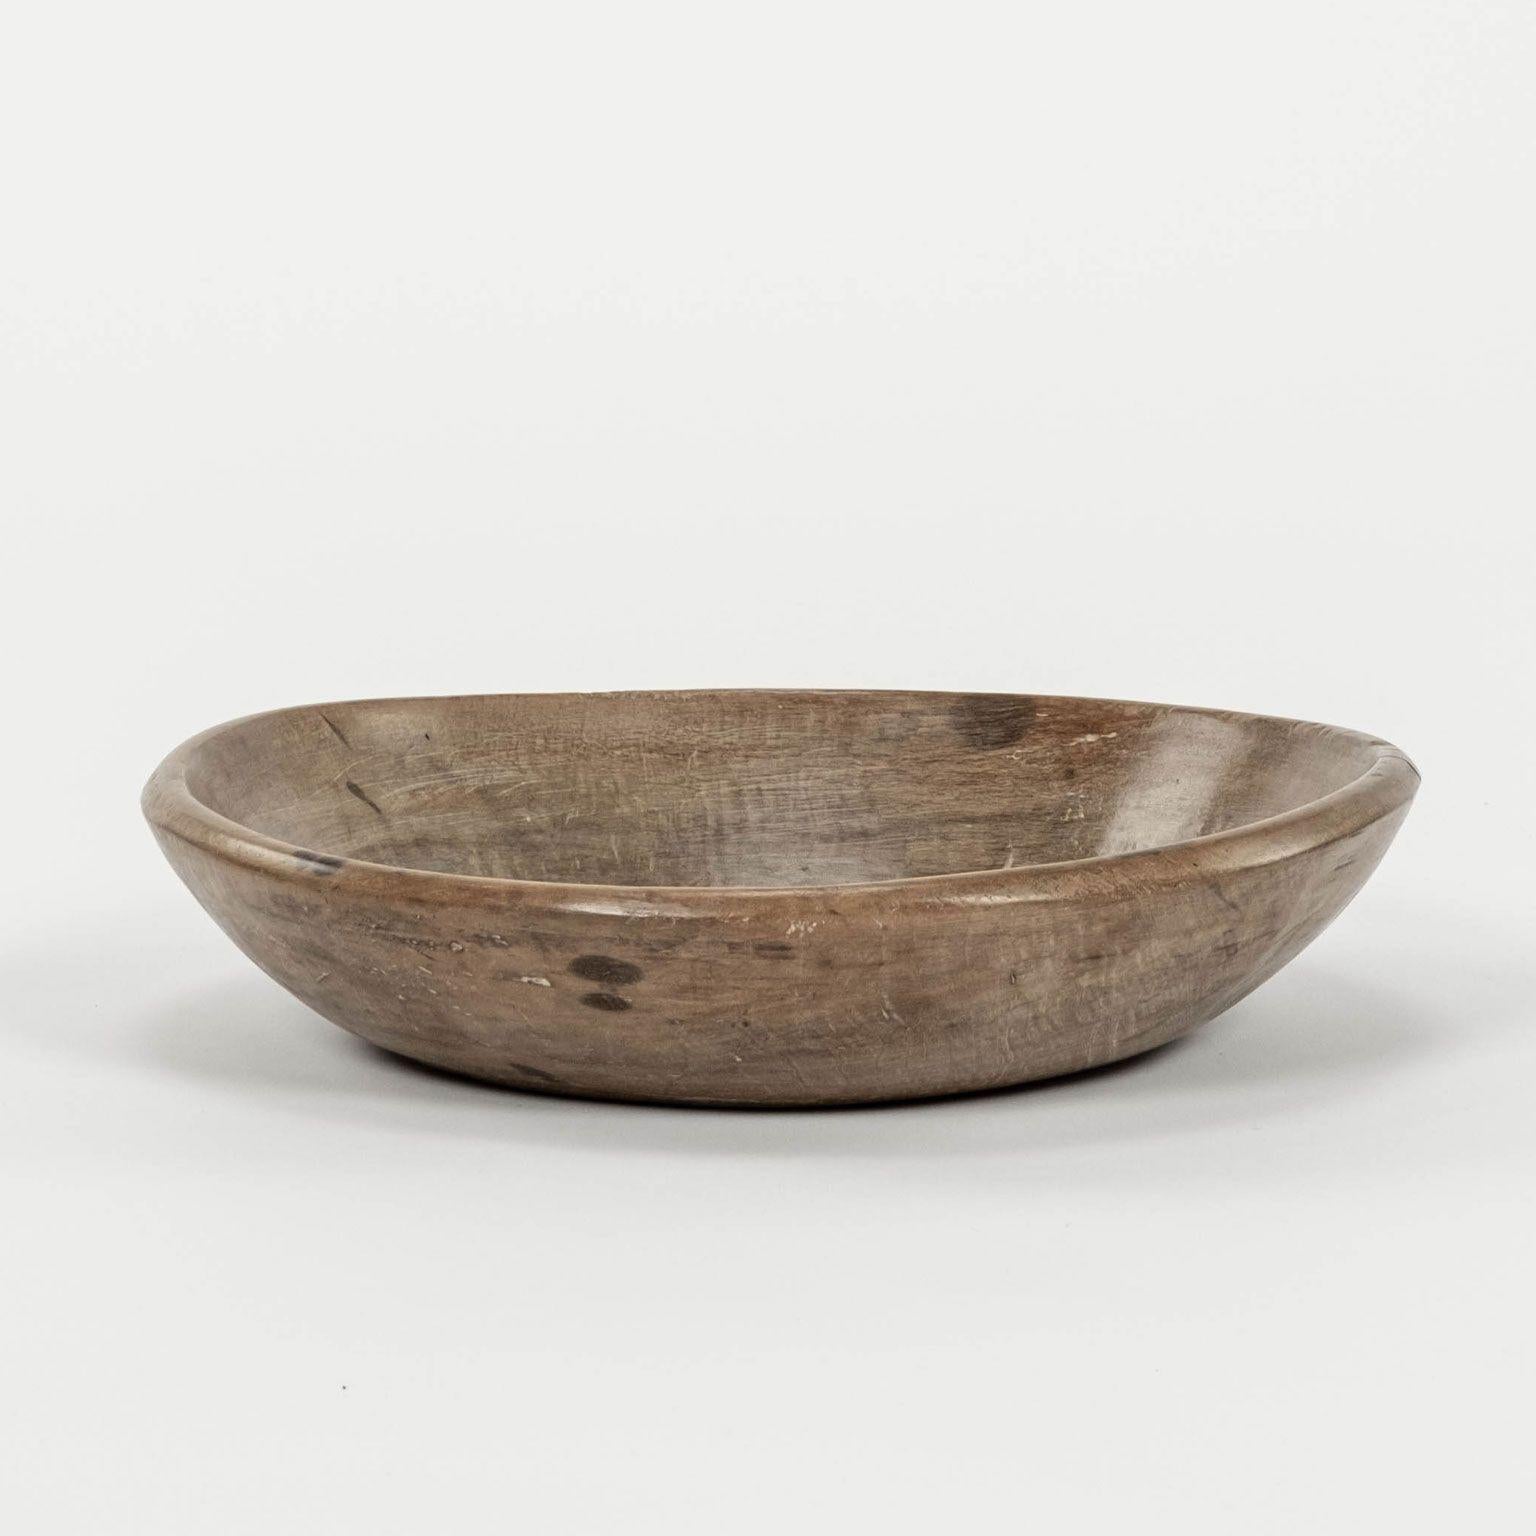 Primitive Rustic Swedish Turned Wooden Bowl in Waxed Finish